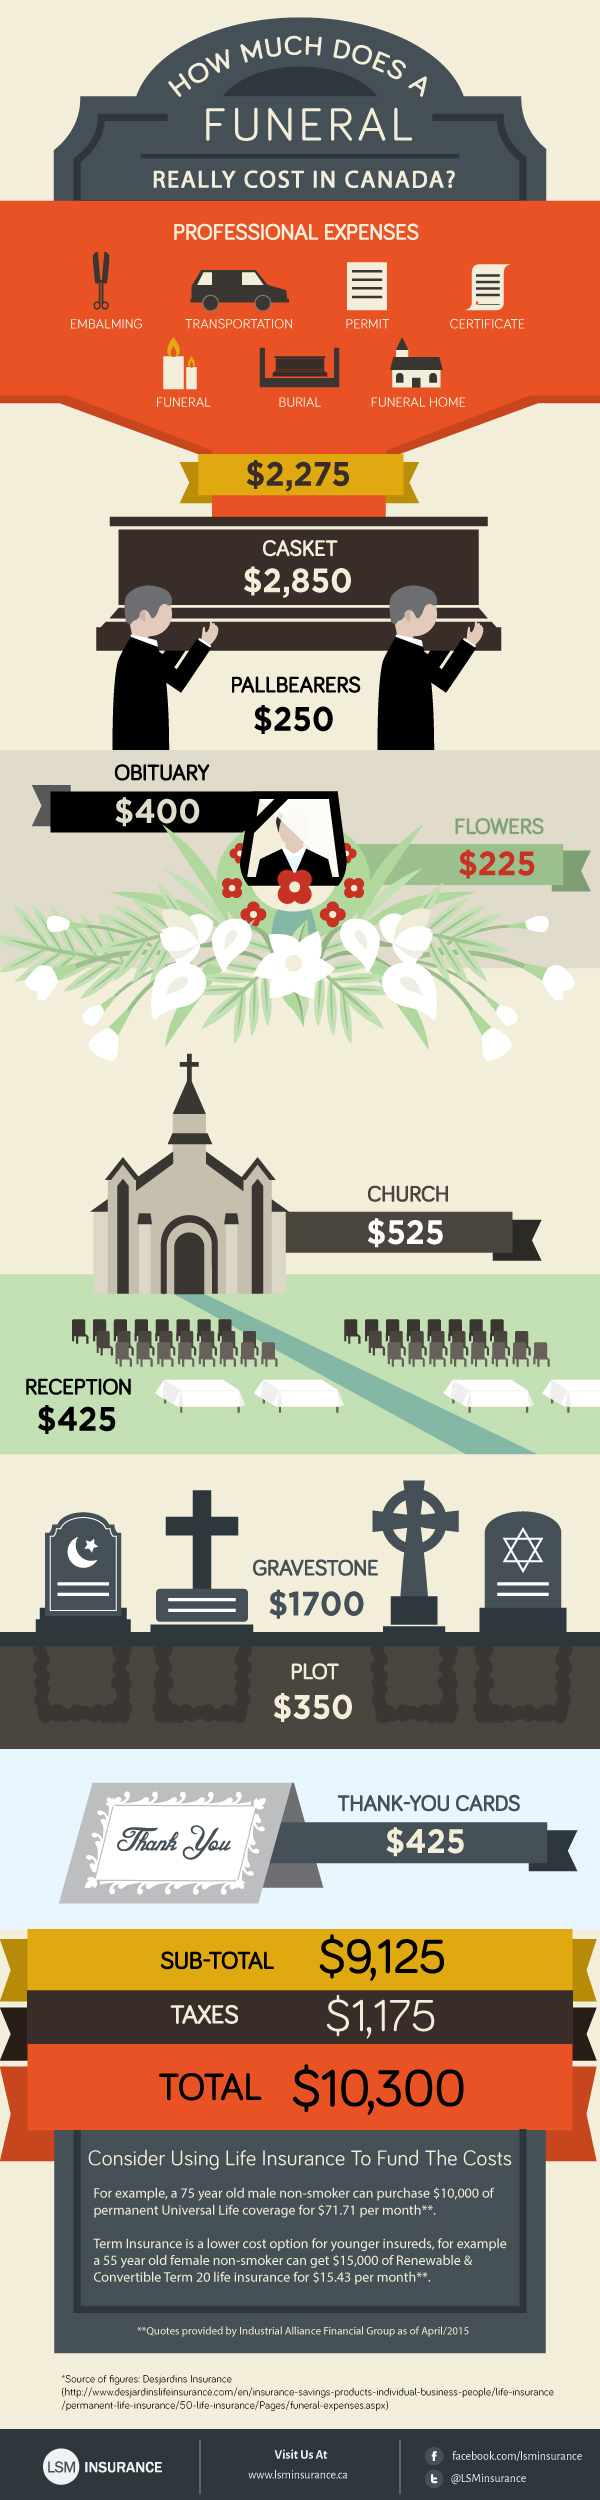 funeral costs infographic 1